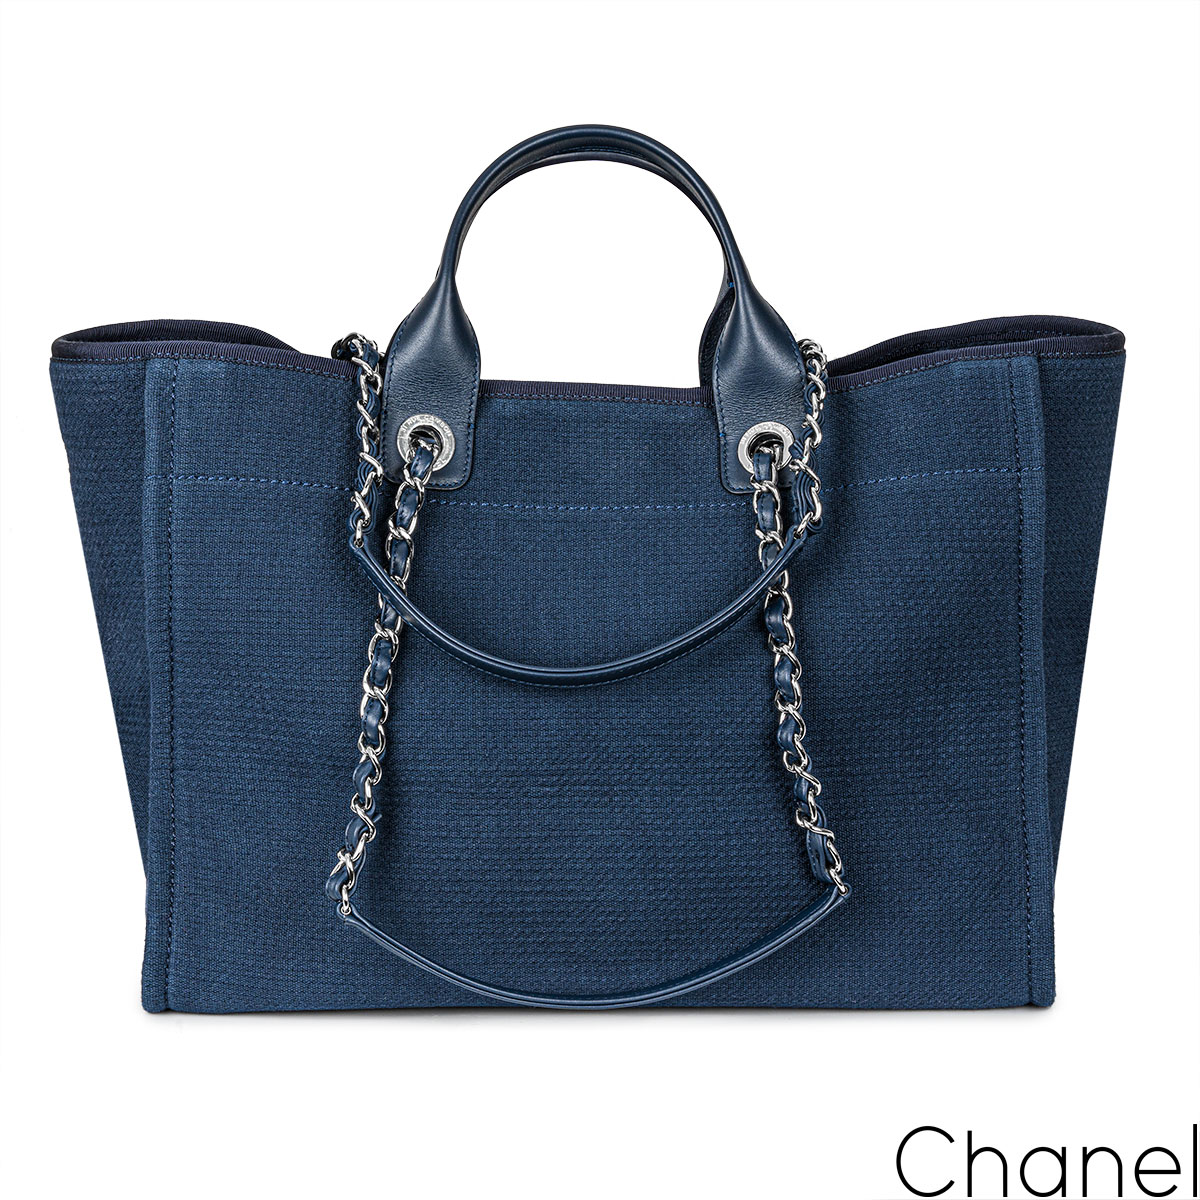 Chanel Blue Deauville Grand Shopping Tote Bag